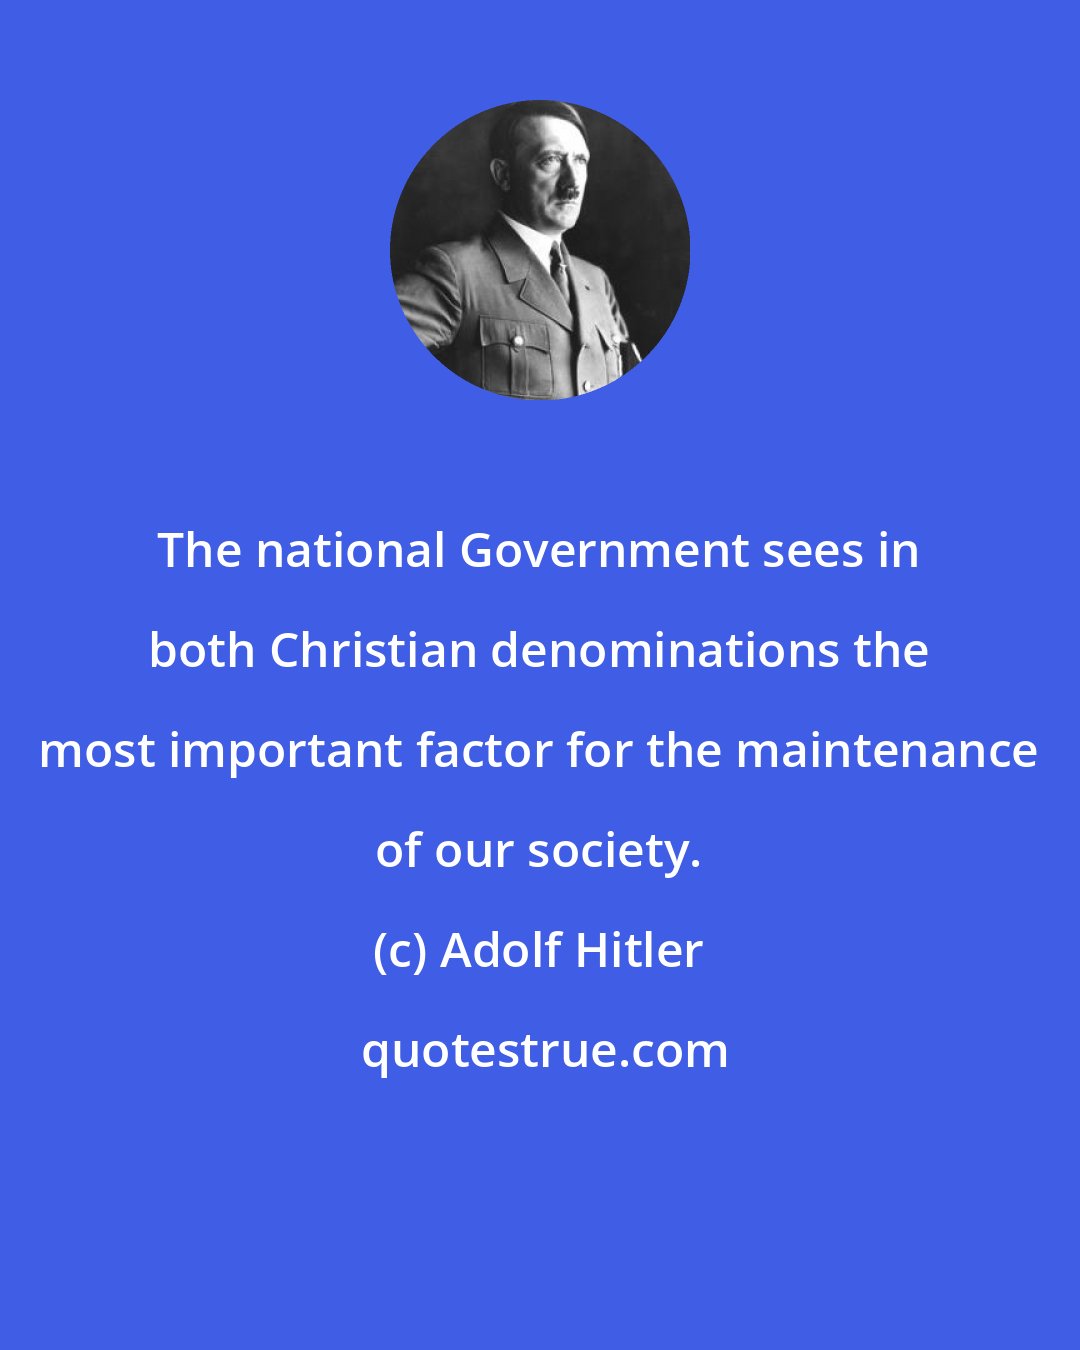 Adolf Hitler: The national Government sees in both Christian denominations the most important factor for the maintenance of our society.